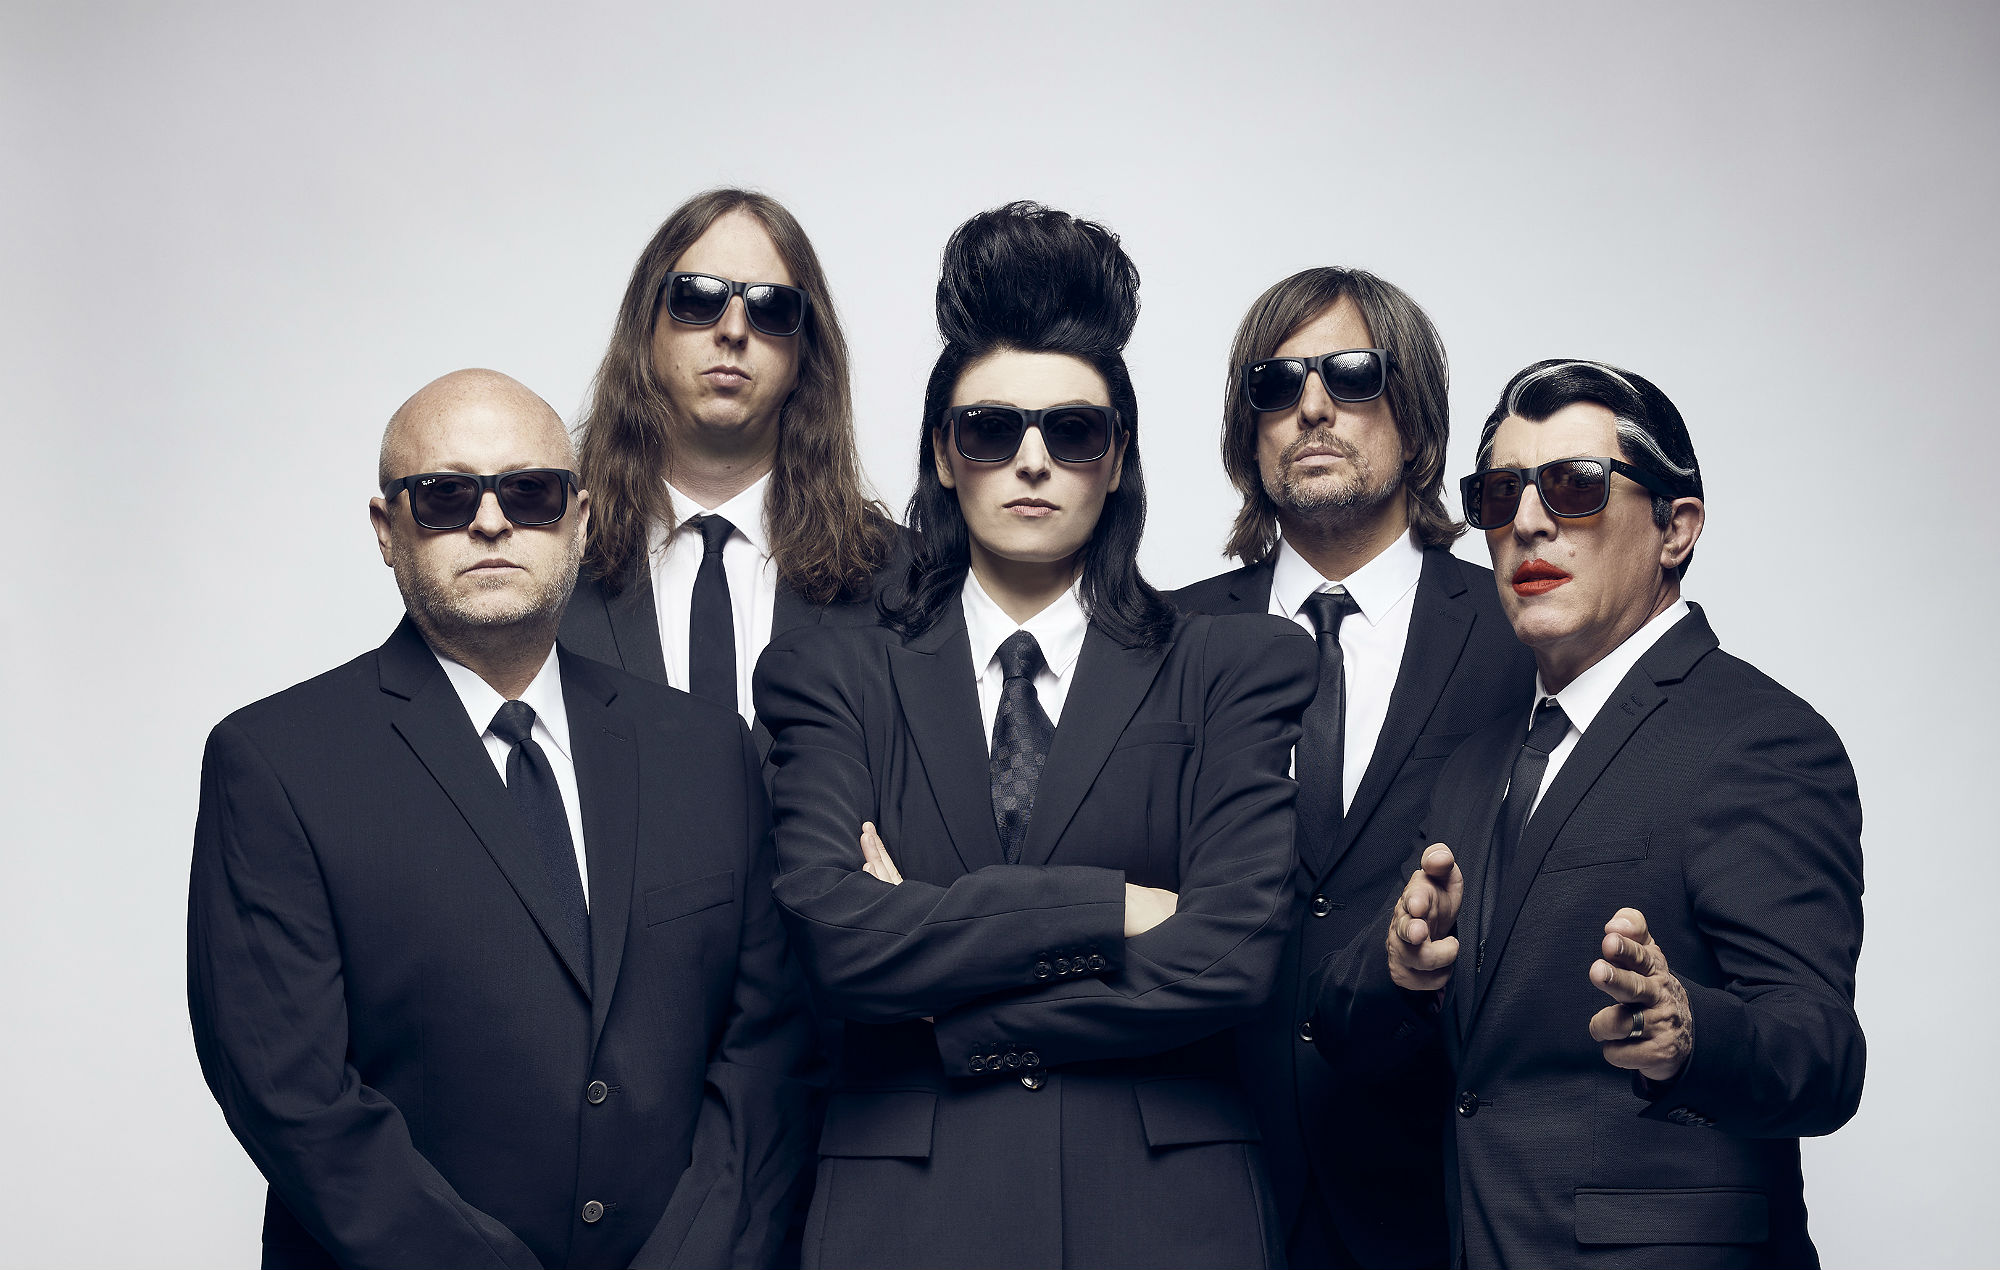 Puscifer: “Eventually we’ll go the way of the dinosaurs, and it will be OK”